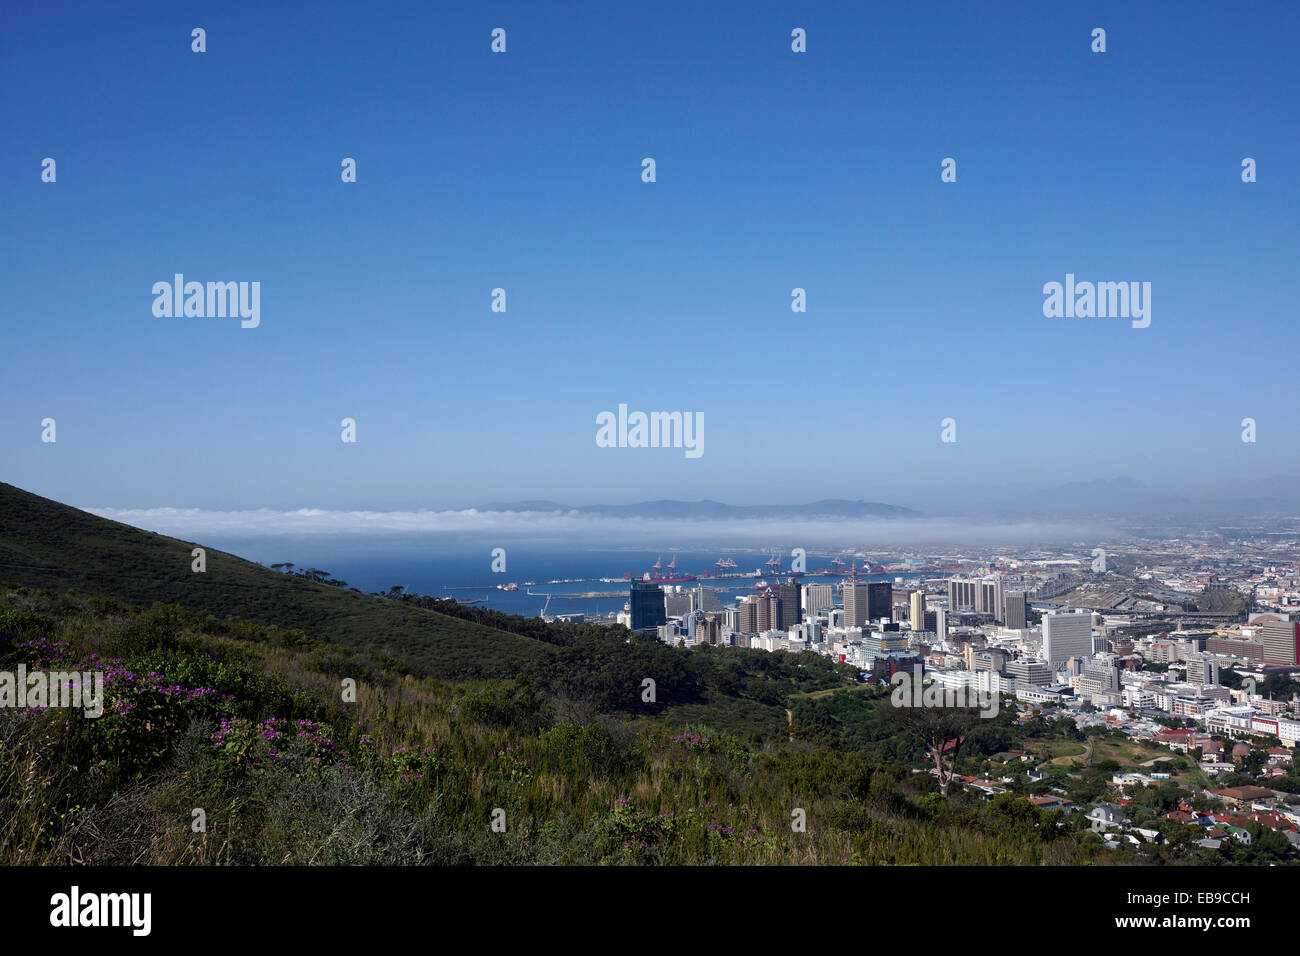 The view of Cape Town central business district  and harbour as seen from Signal Hill, Cape Town, South Africa. Stock Photo